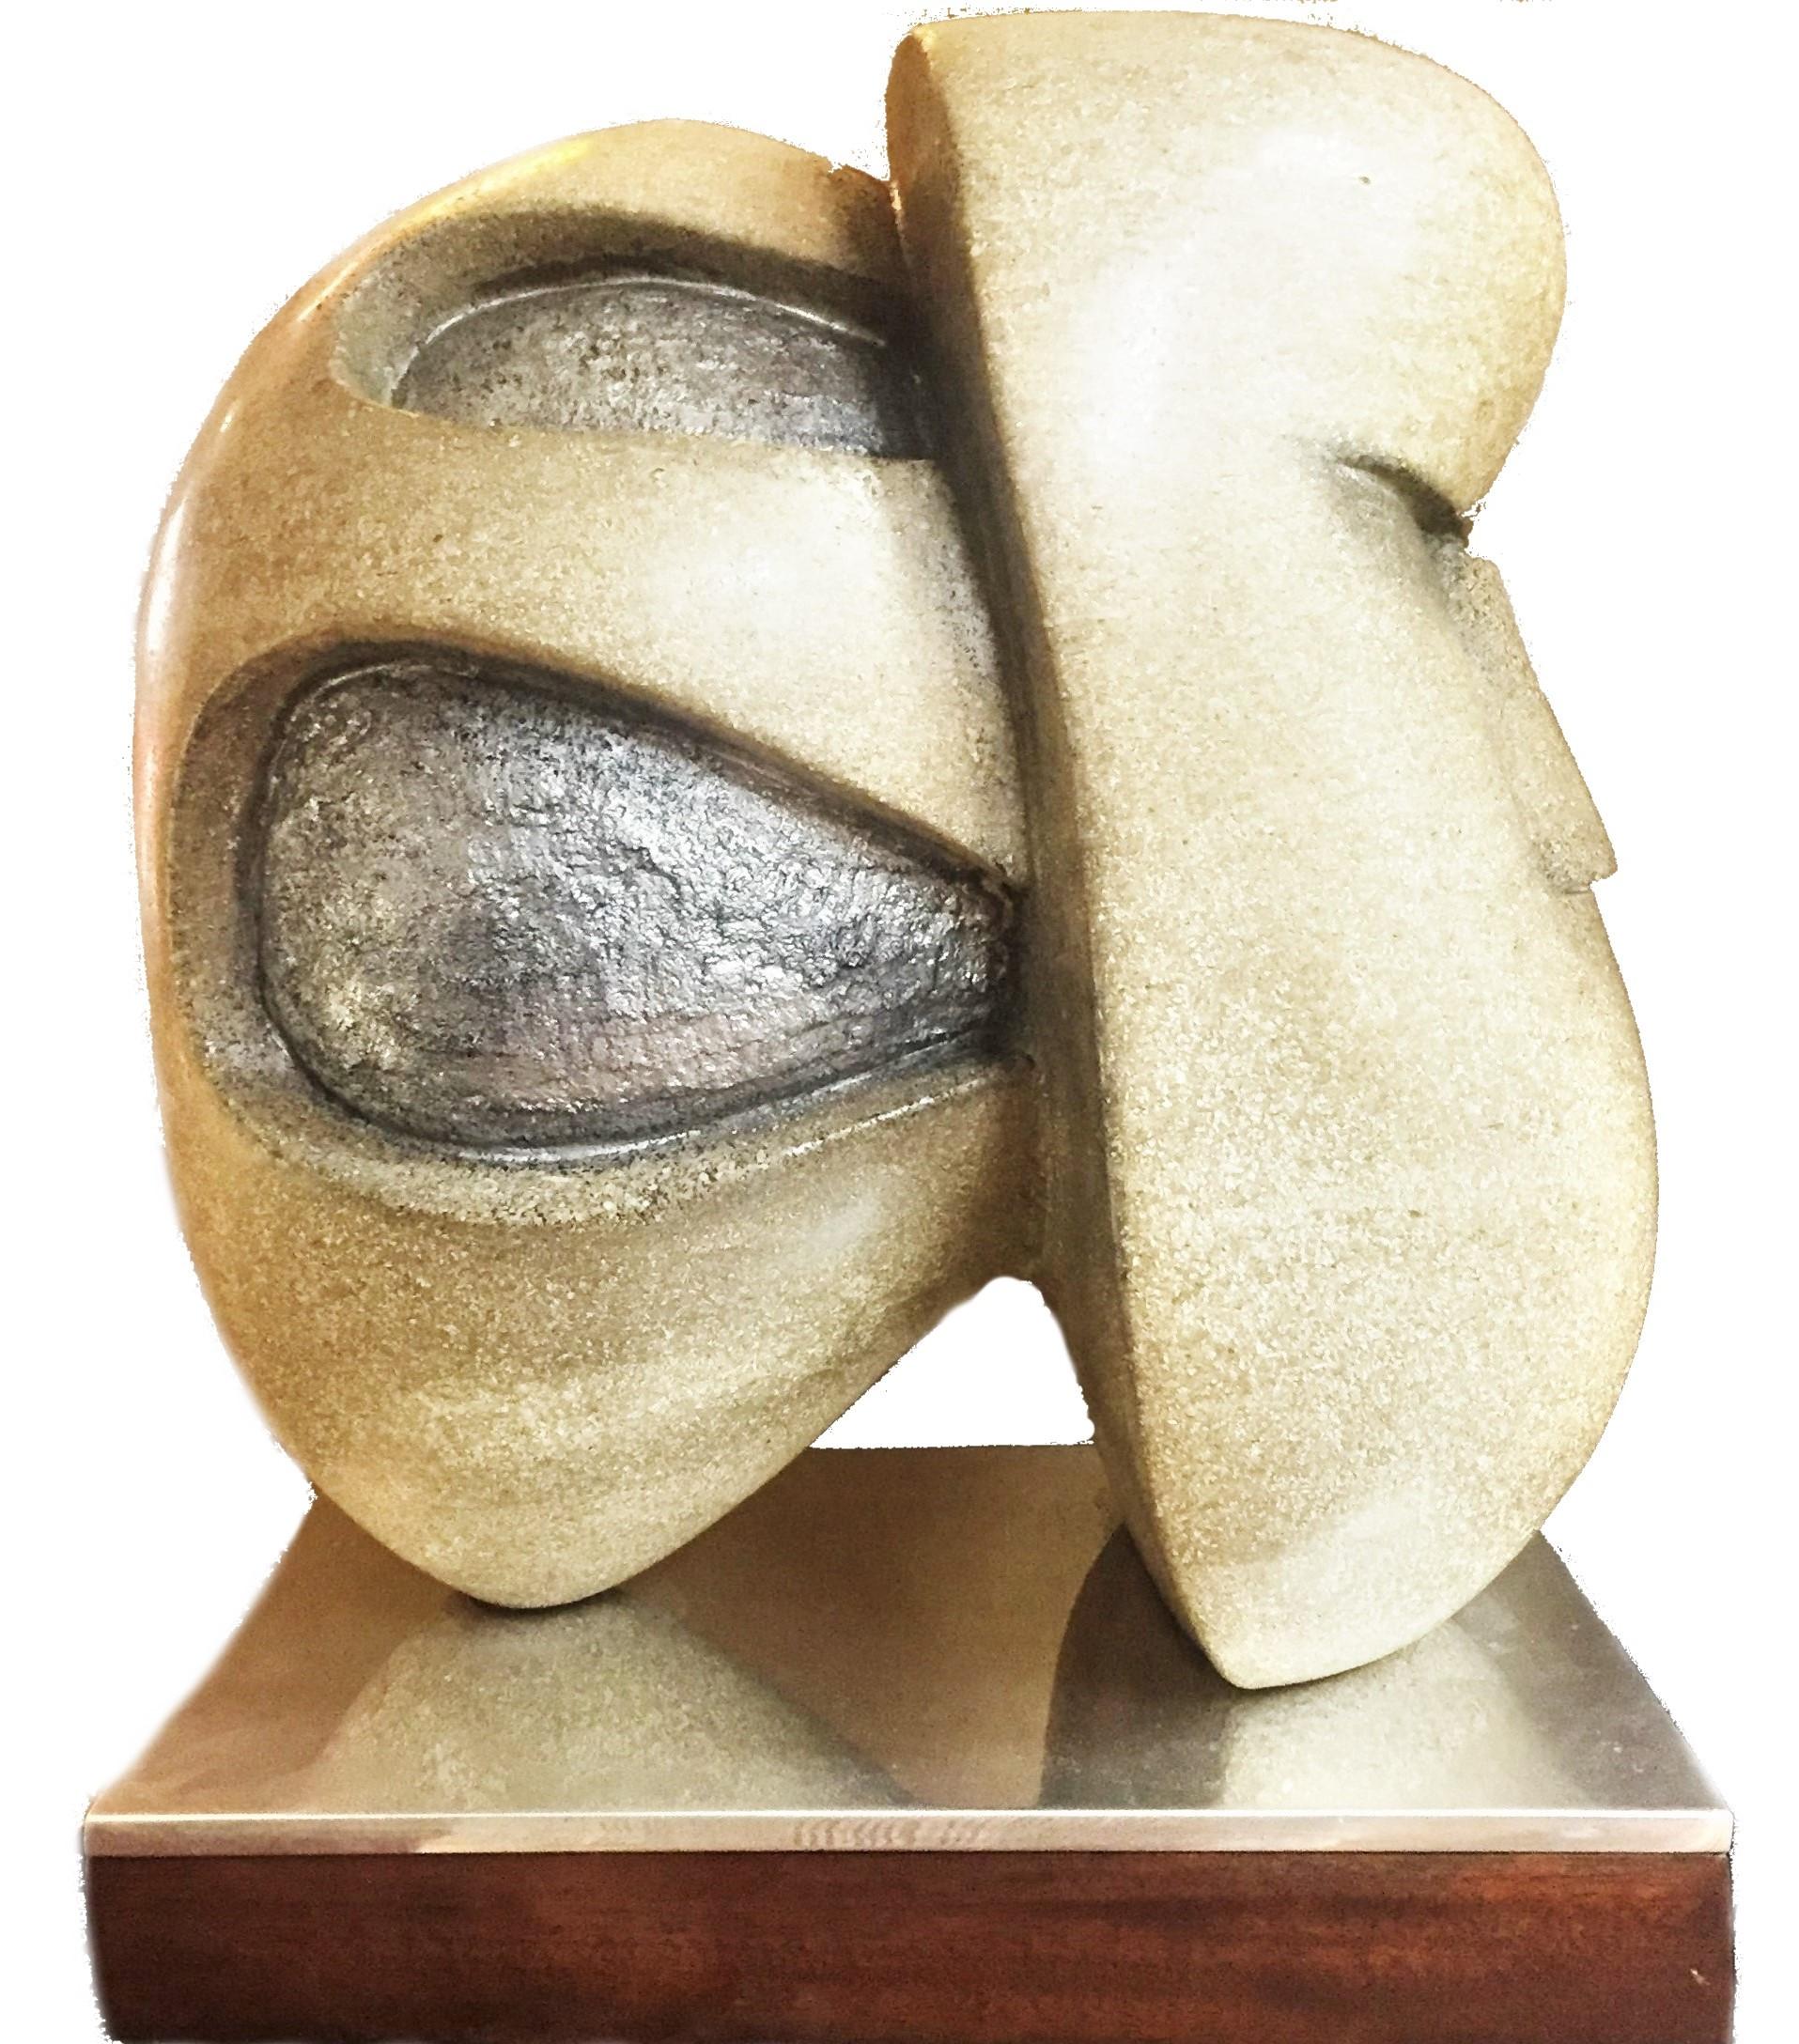 Lilly M. Tussey (Bulgarian/American, …. - 2005) was an outstanding sculptor, mainly working in marble and limestone. 

Exhibits:
• Audubon Artists, New York City, from 1978-1990.
• Knickerbocker Artists, New York City, from 1976-1990.
•